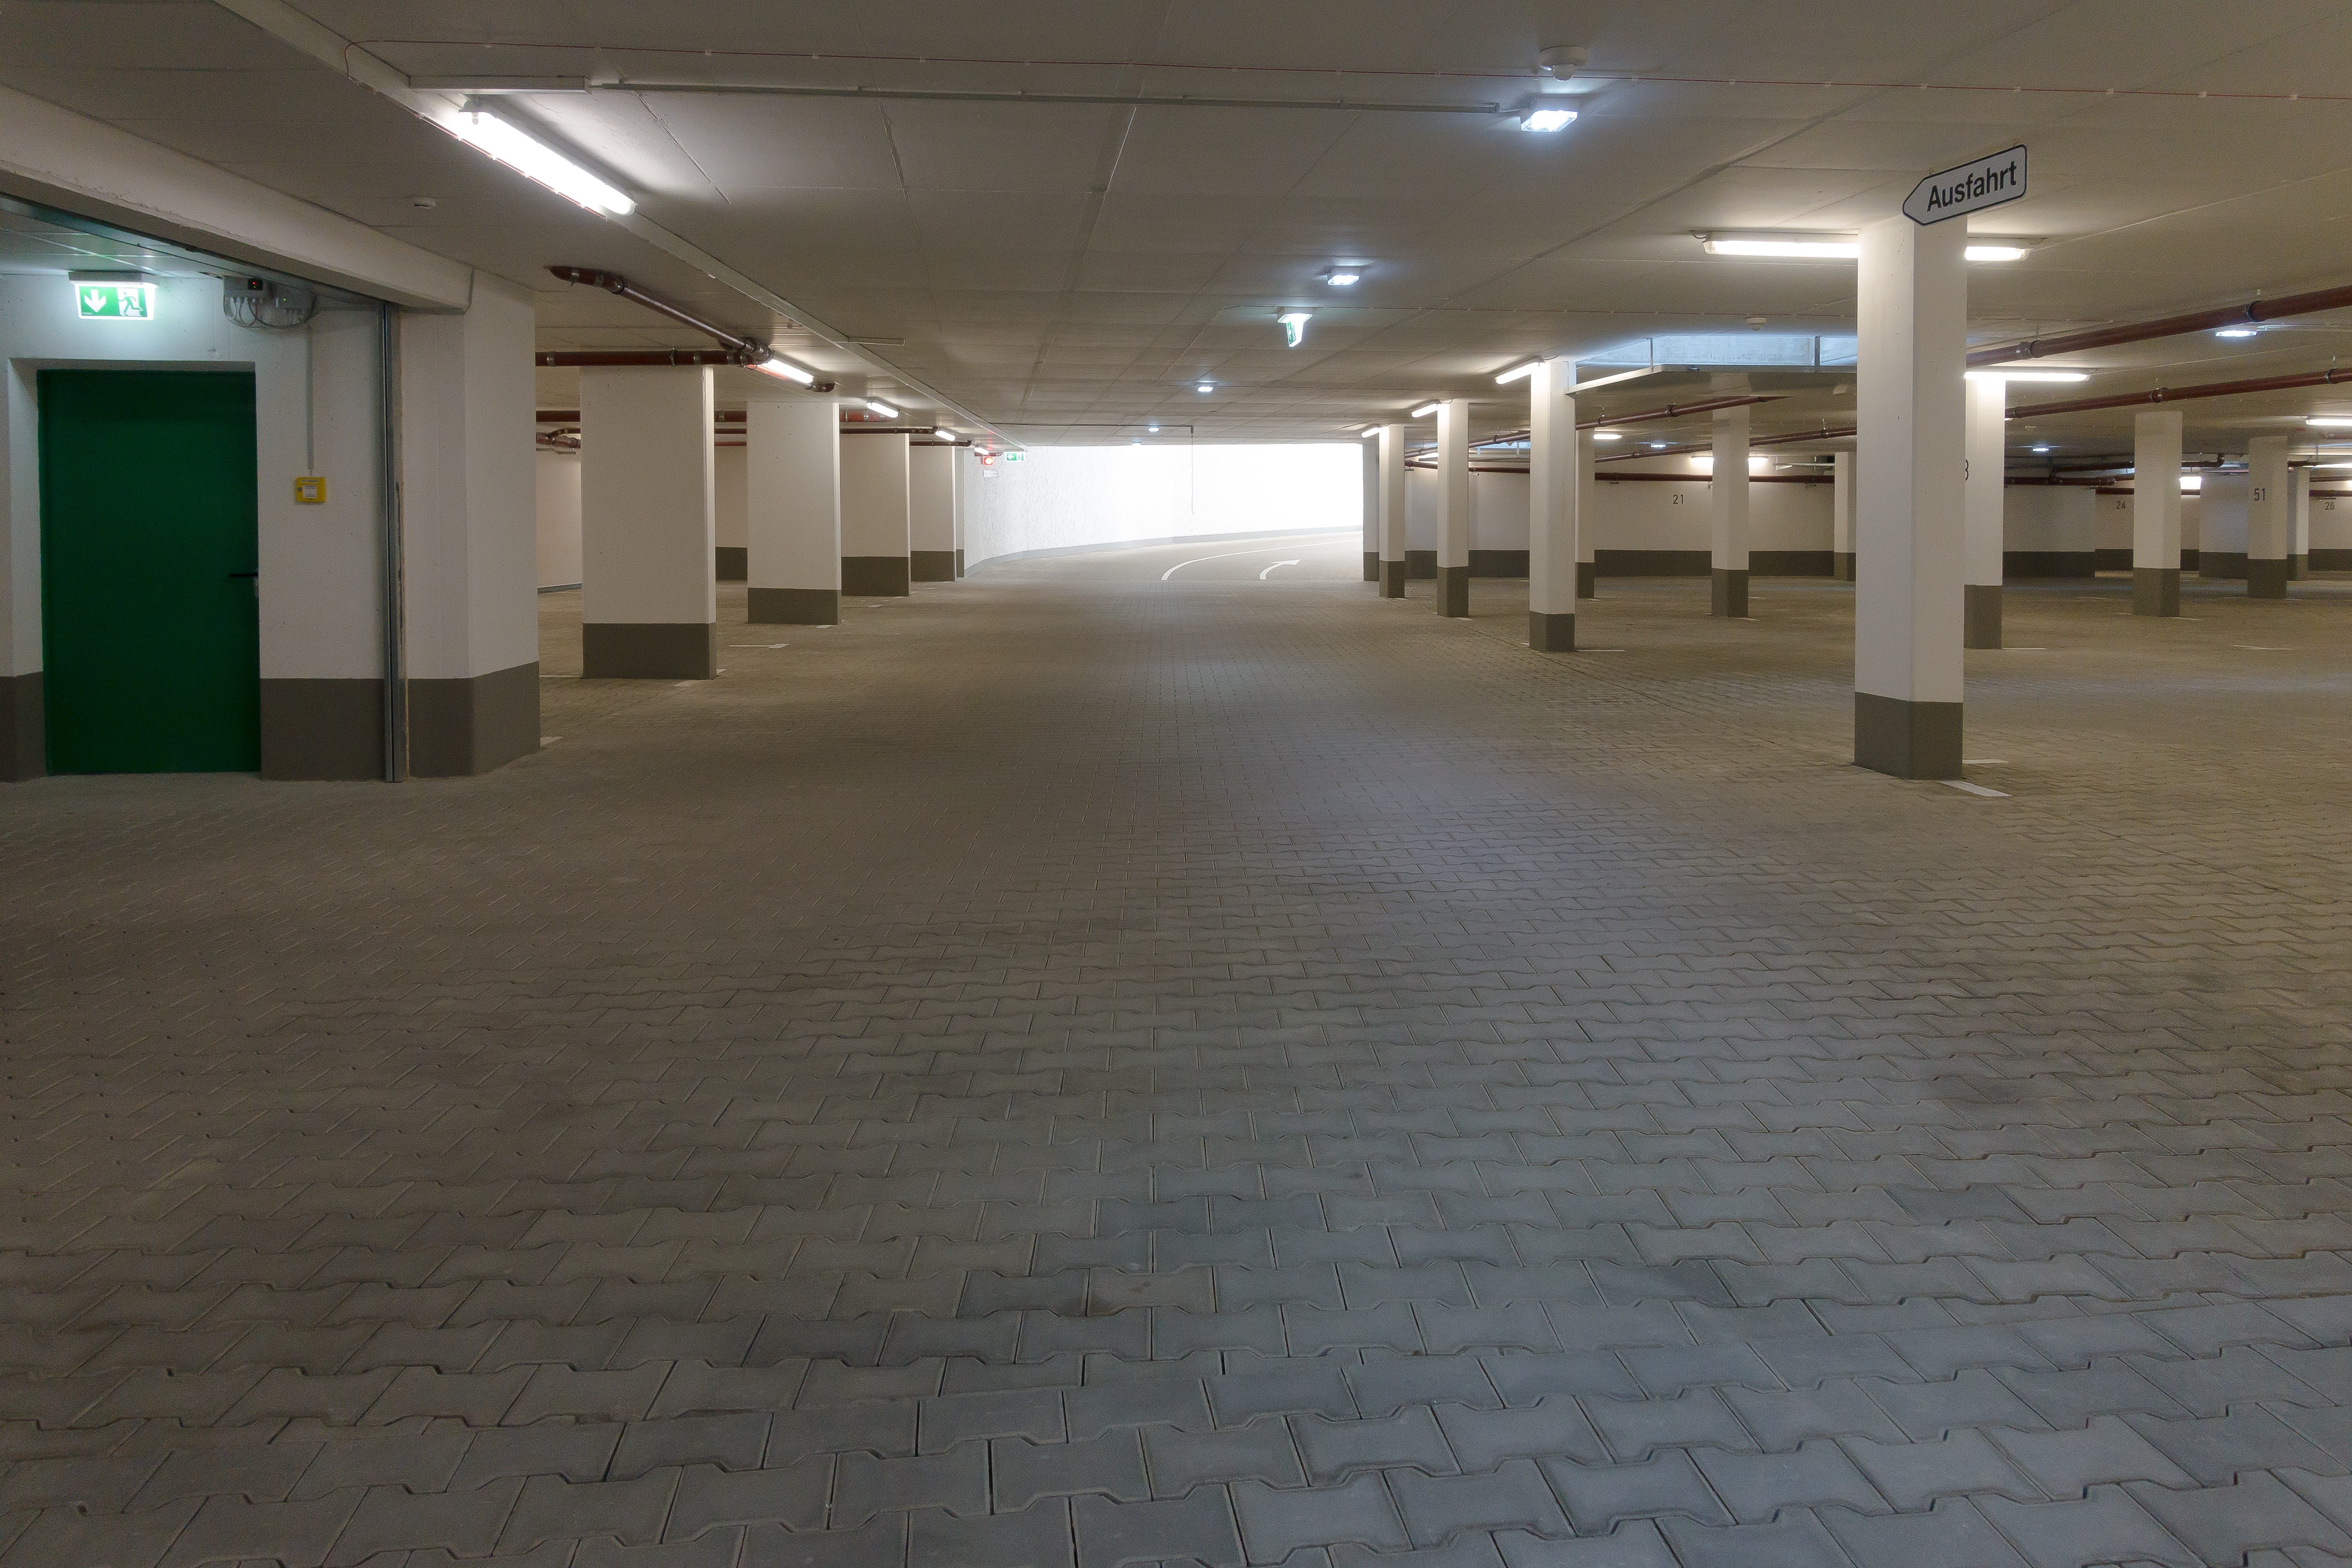 Free Images : ground, floor, subway, pattern, exit, empty, parking ...